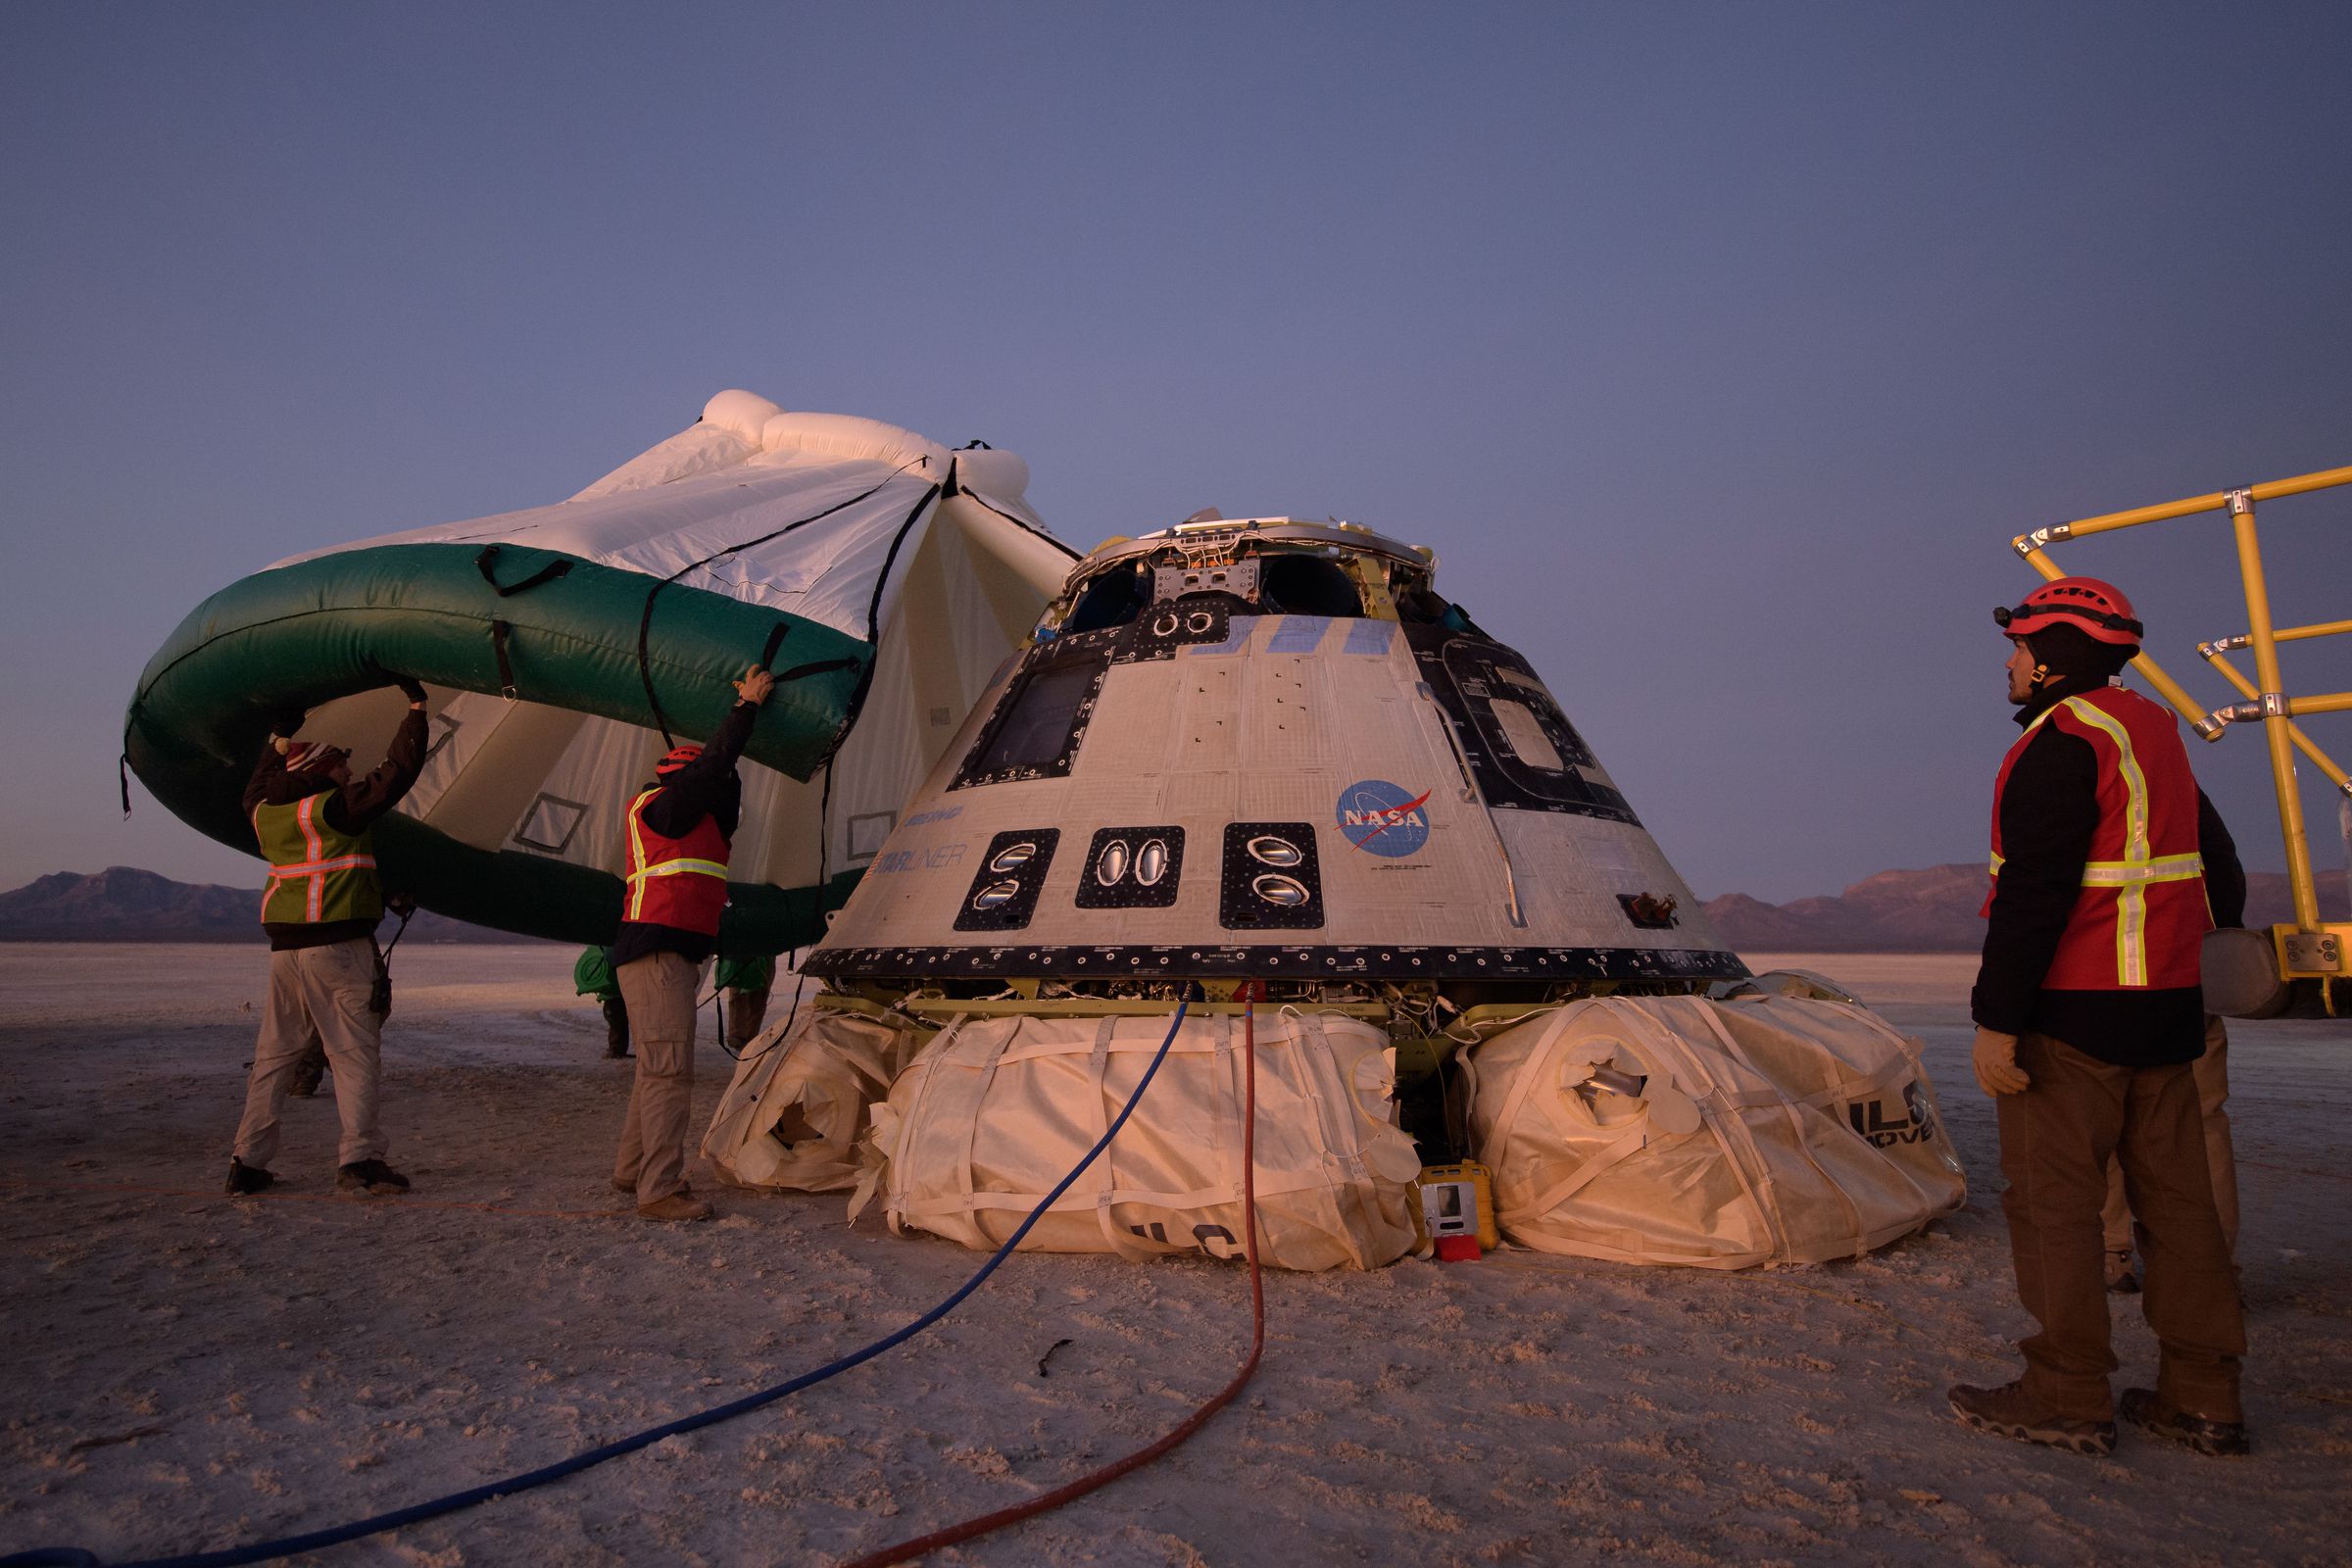 Boeing’s CST-100 Starliner after landing in the New Mexico desert on December 22nd.